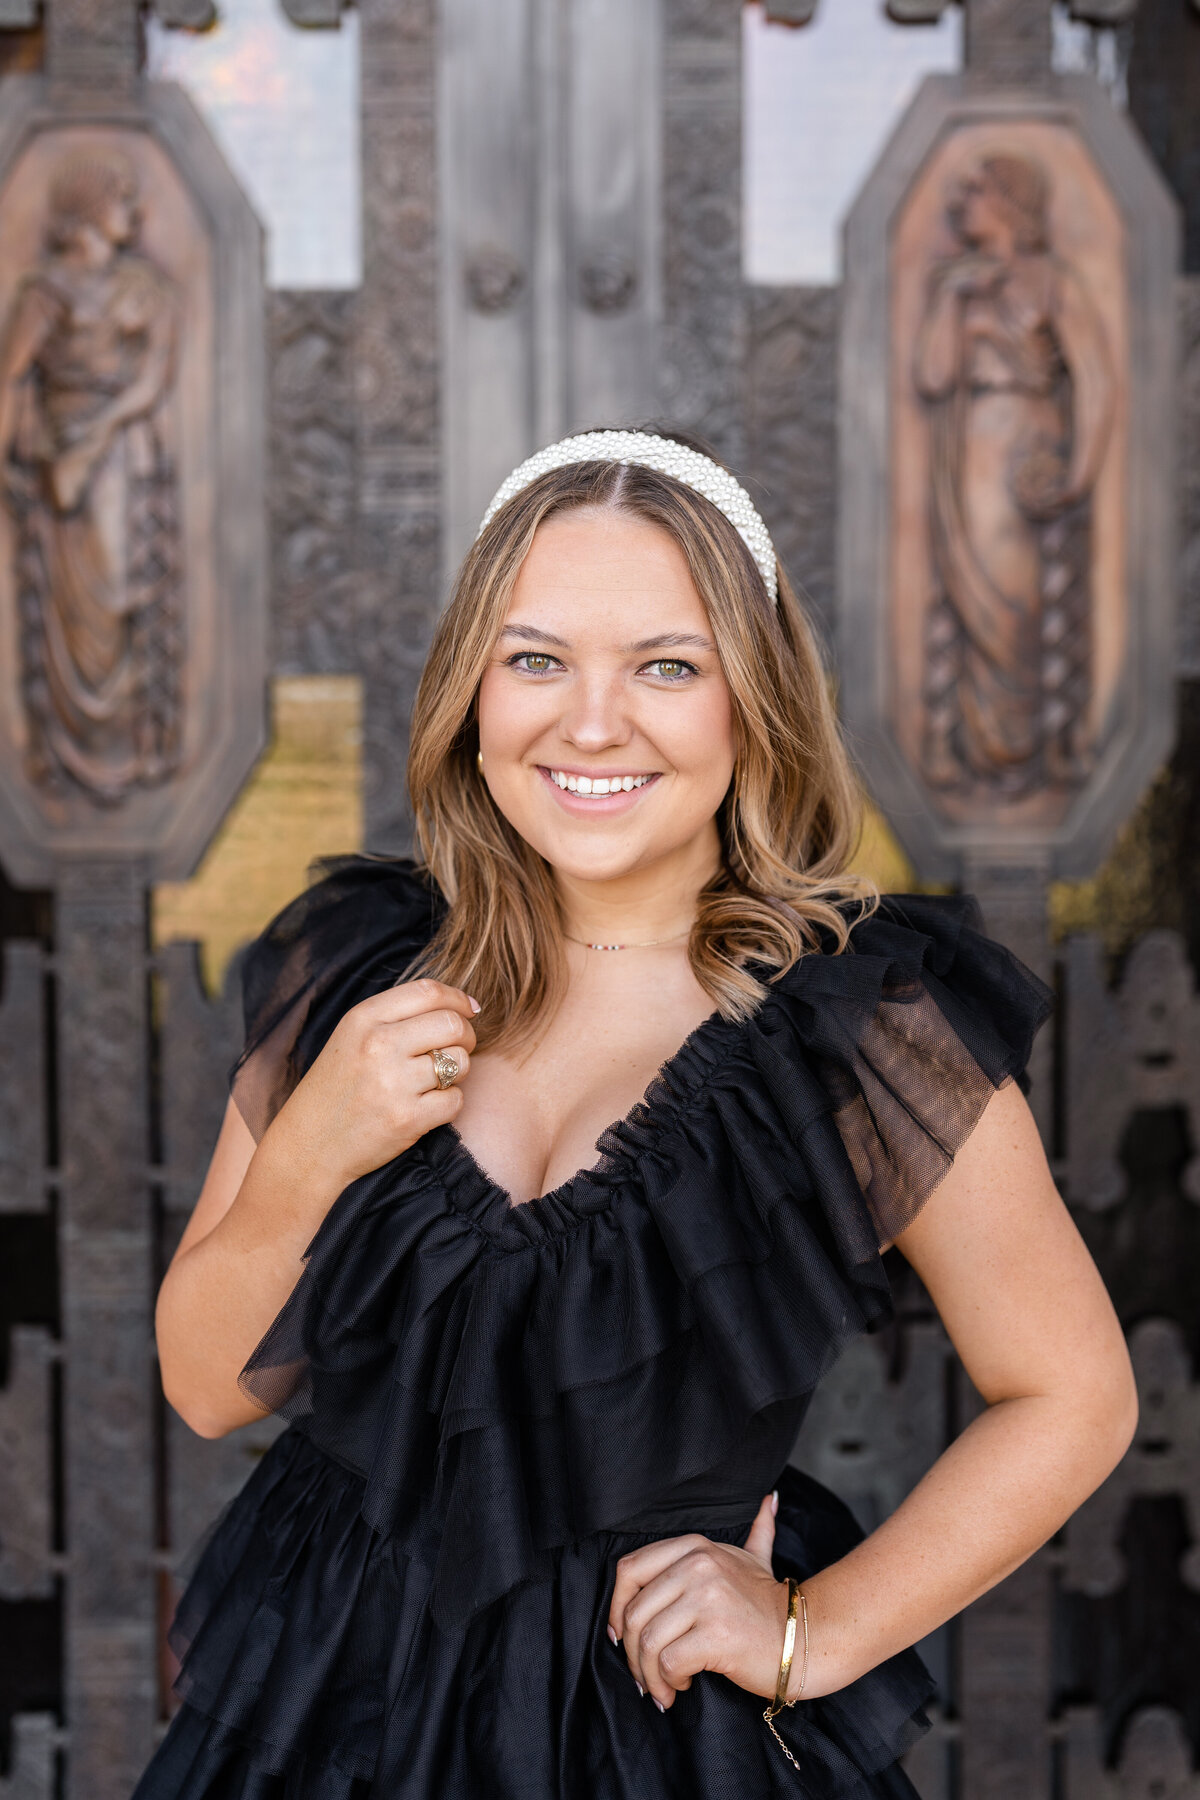 Texas A&M senior girl smiling in front of Administration Building front door wearing a fluffy black dress and pearl headband